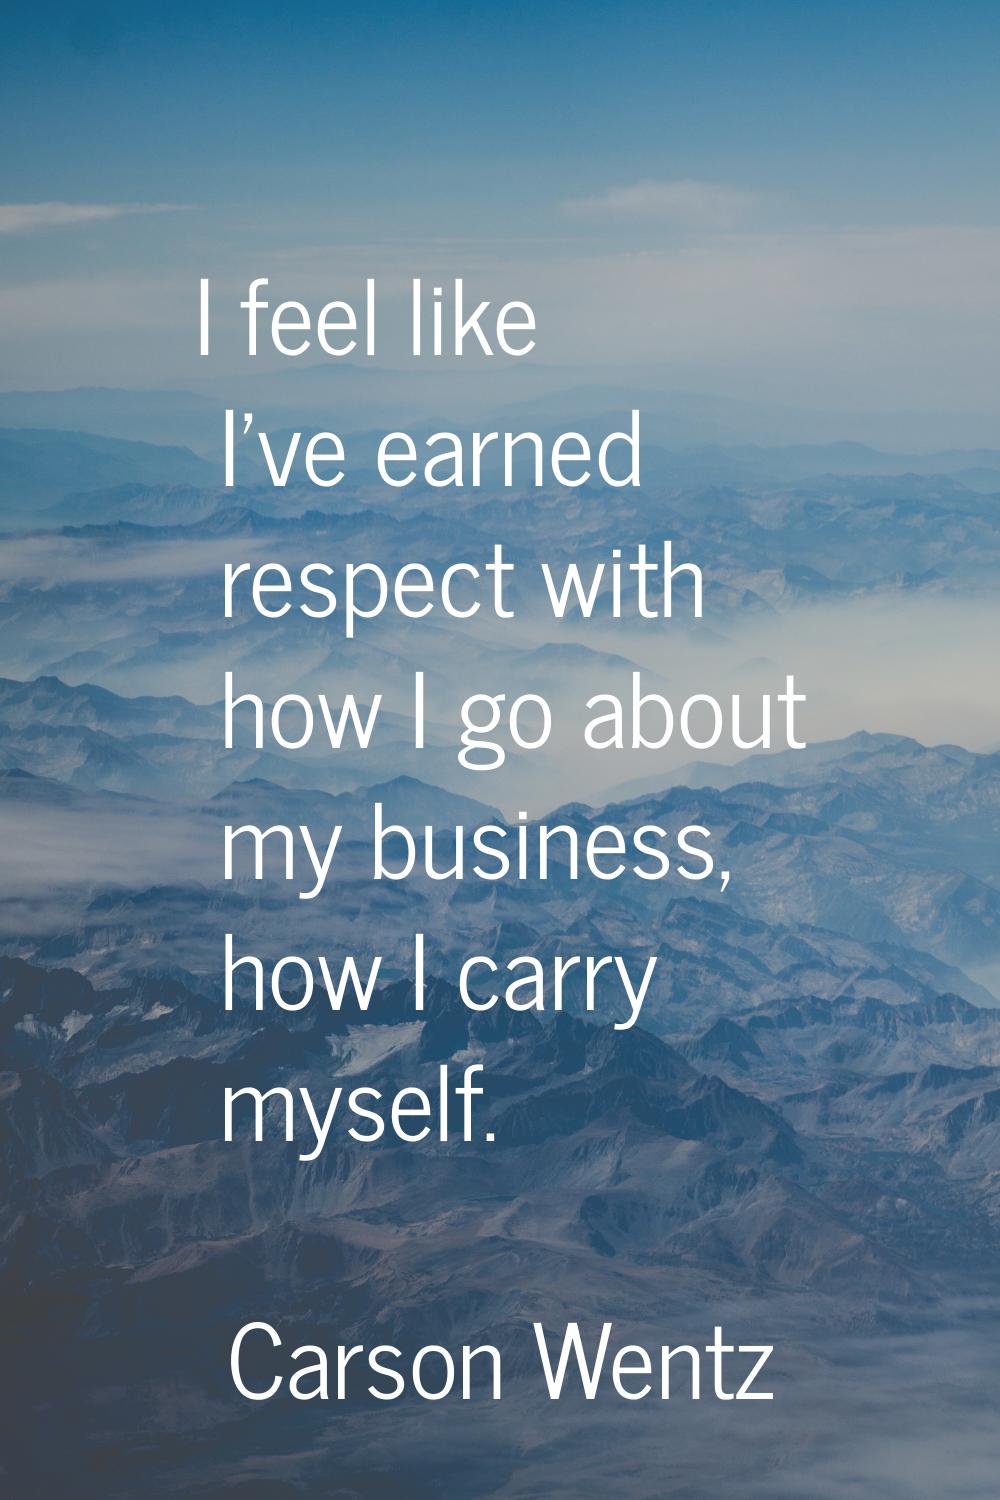 I feel like I've earned respect with how I go about my business, how I carry myself.